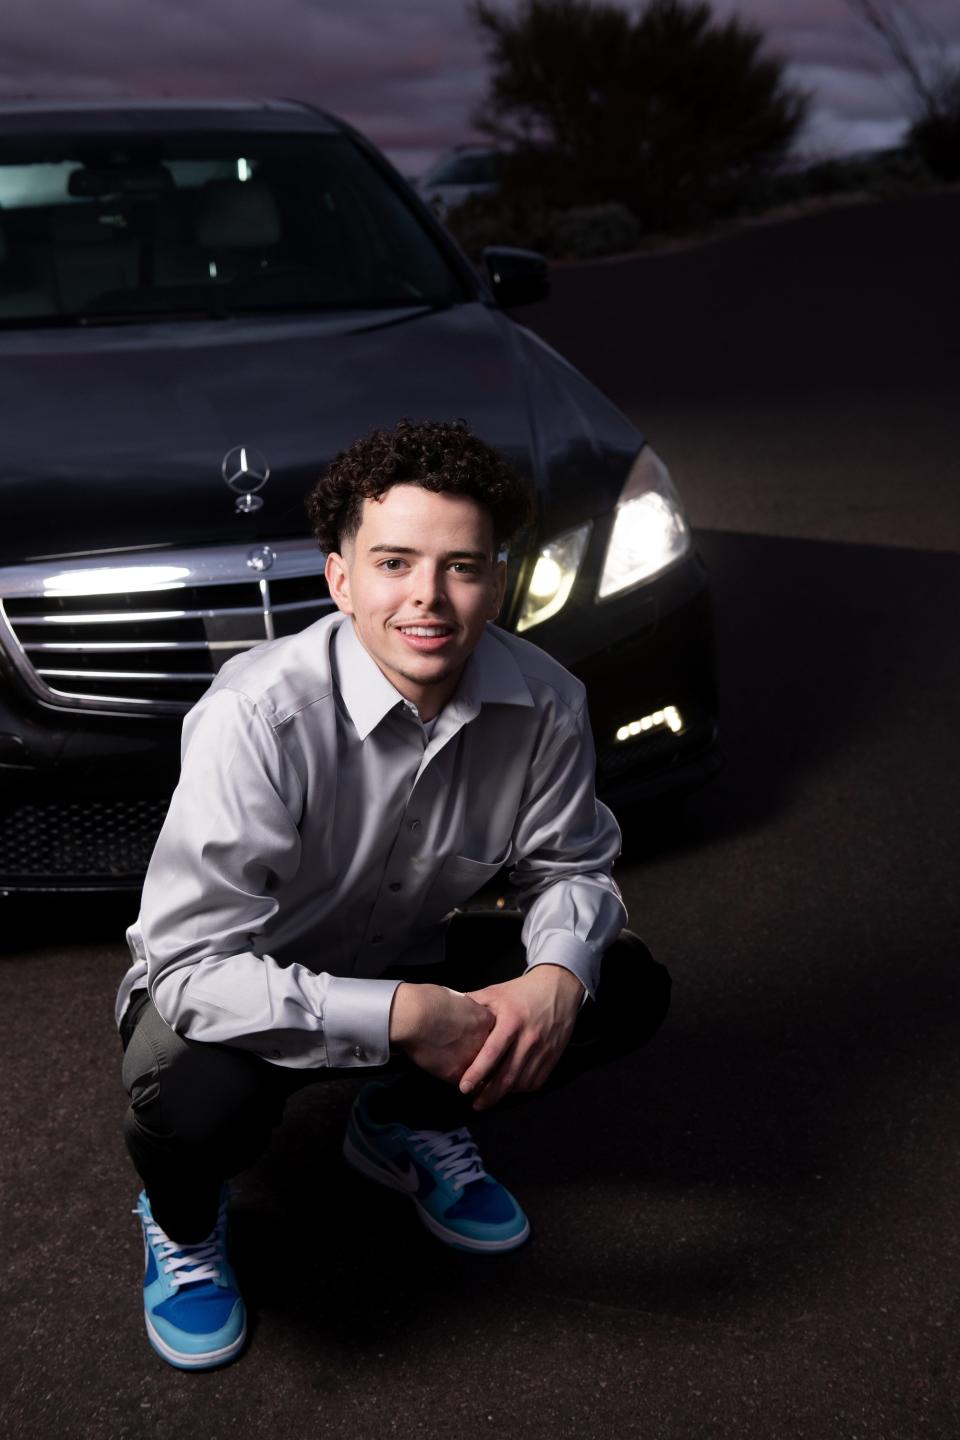 Christian Renaud took many senior photos in front of his car. The Tucson, Ariz., college freshman was eager to celebrate his senior year of high school in a big way after the pandemic.